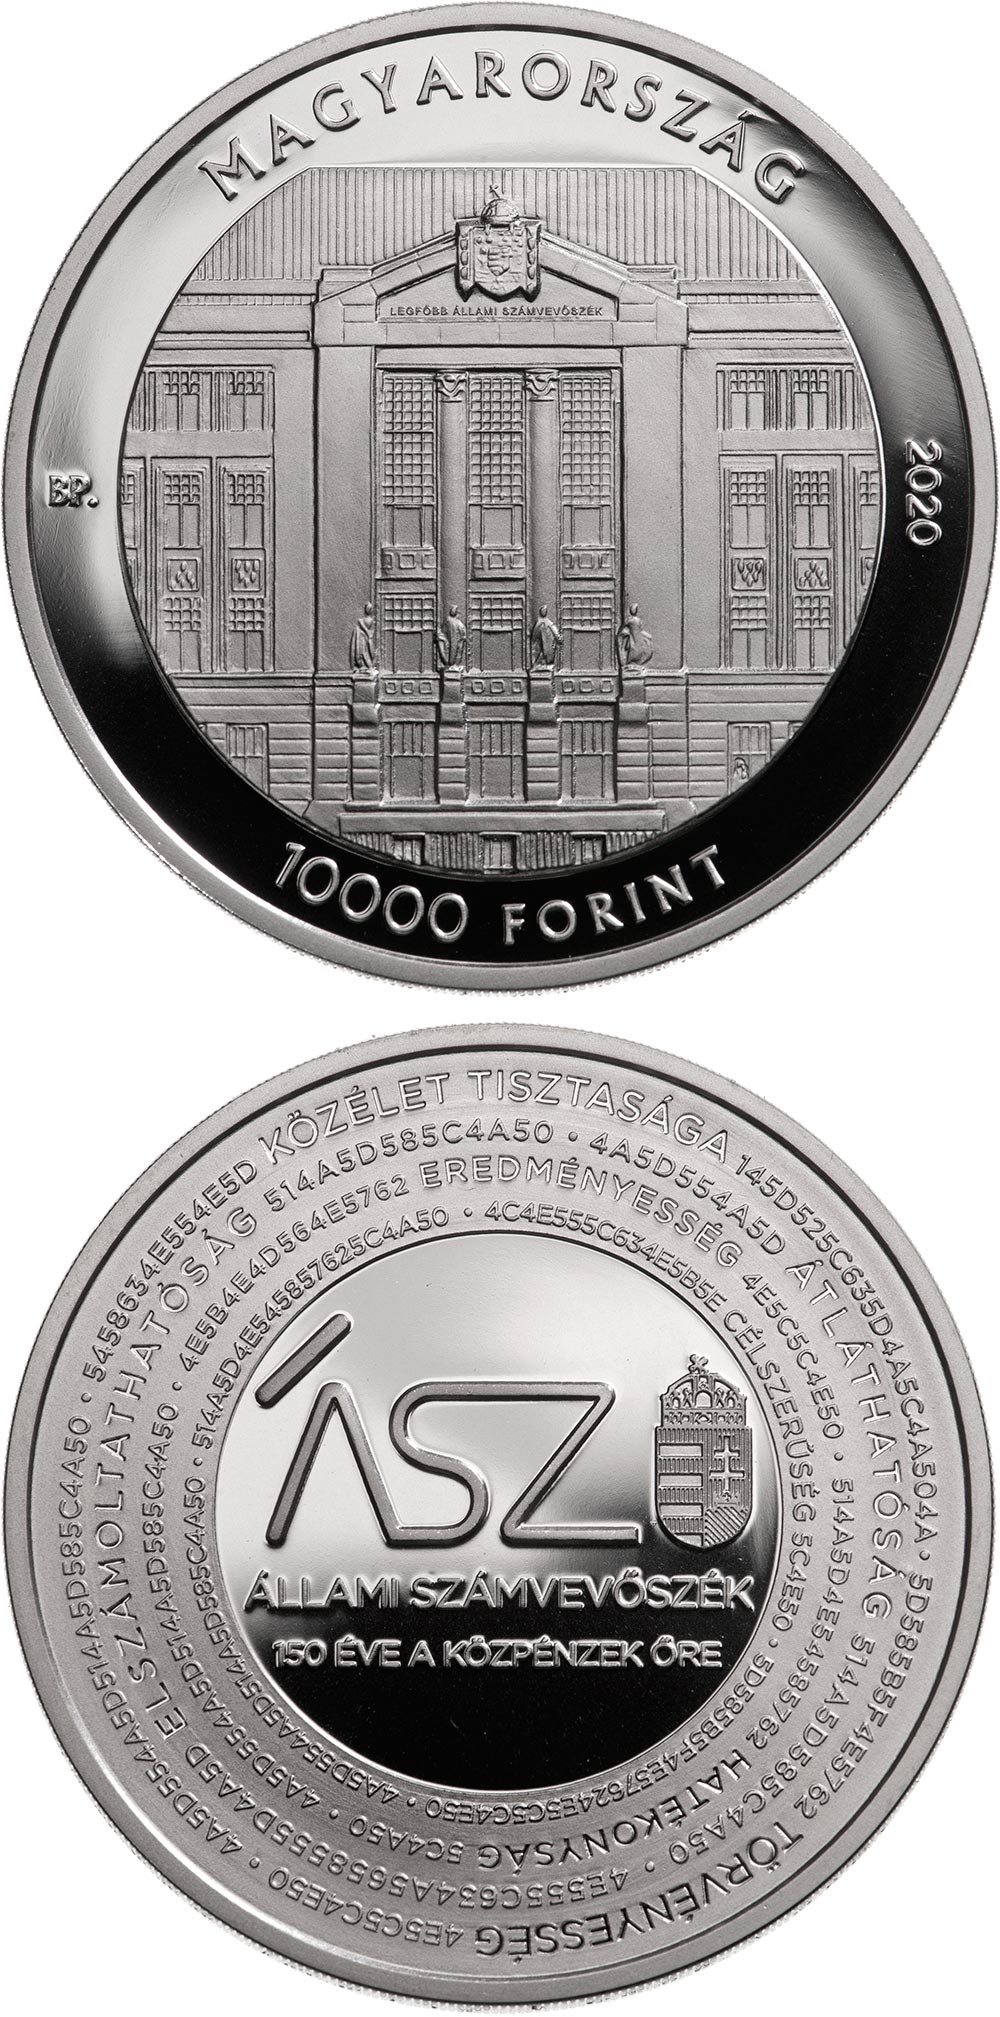 State Audit Office of Hungary 10000 Ft Hungary 2020 Proof Silver